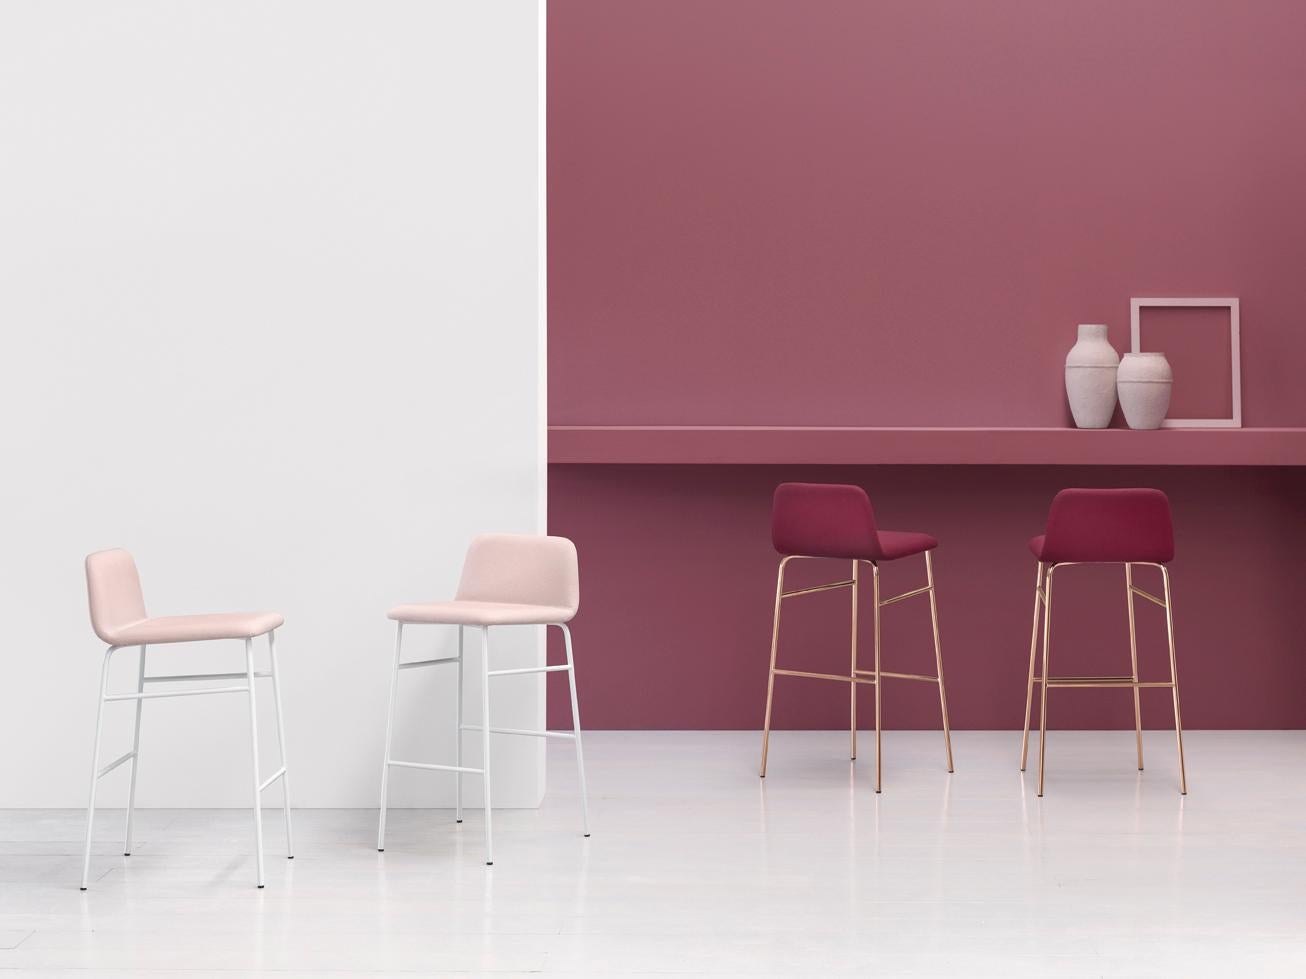 The Bardot family expands and is enriched by a stool with 4-leg metal structure and footrests alongside an accommodating and round seat.
Perfect for use in both public environments and private contexts, from the kitchen to the dining and living